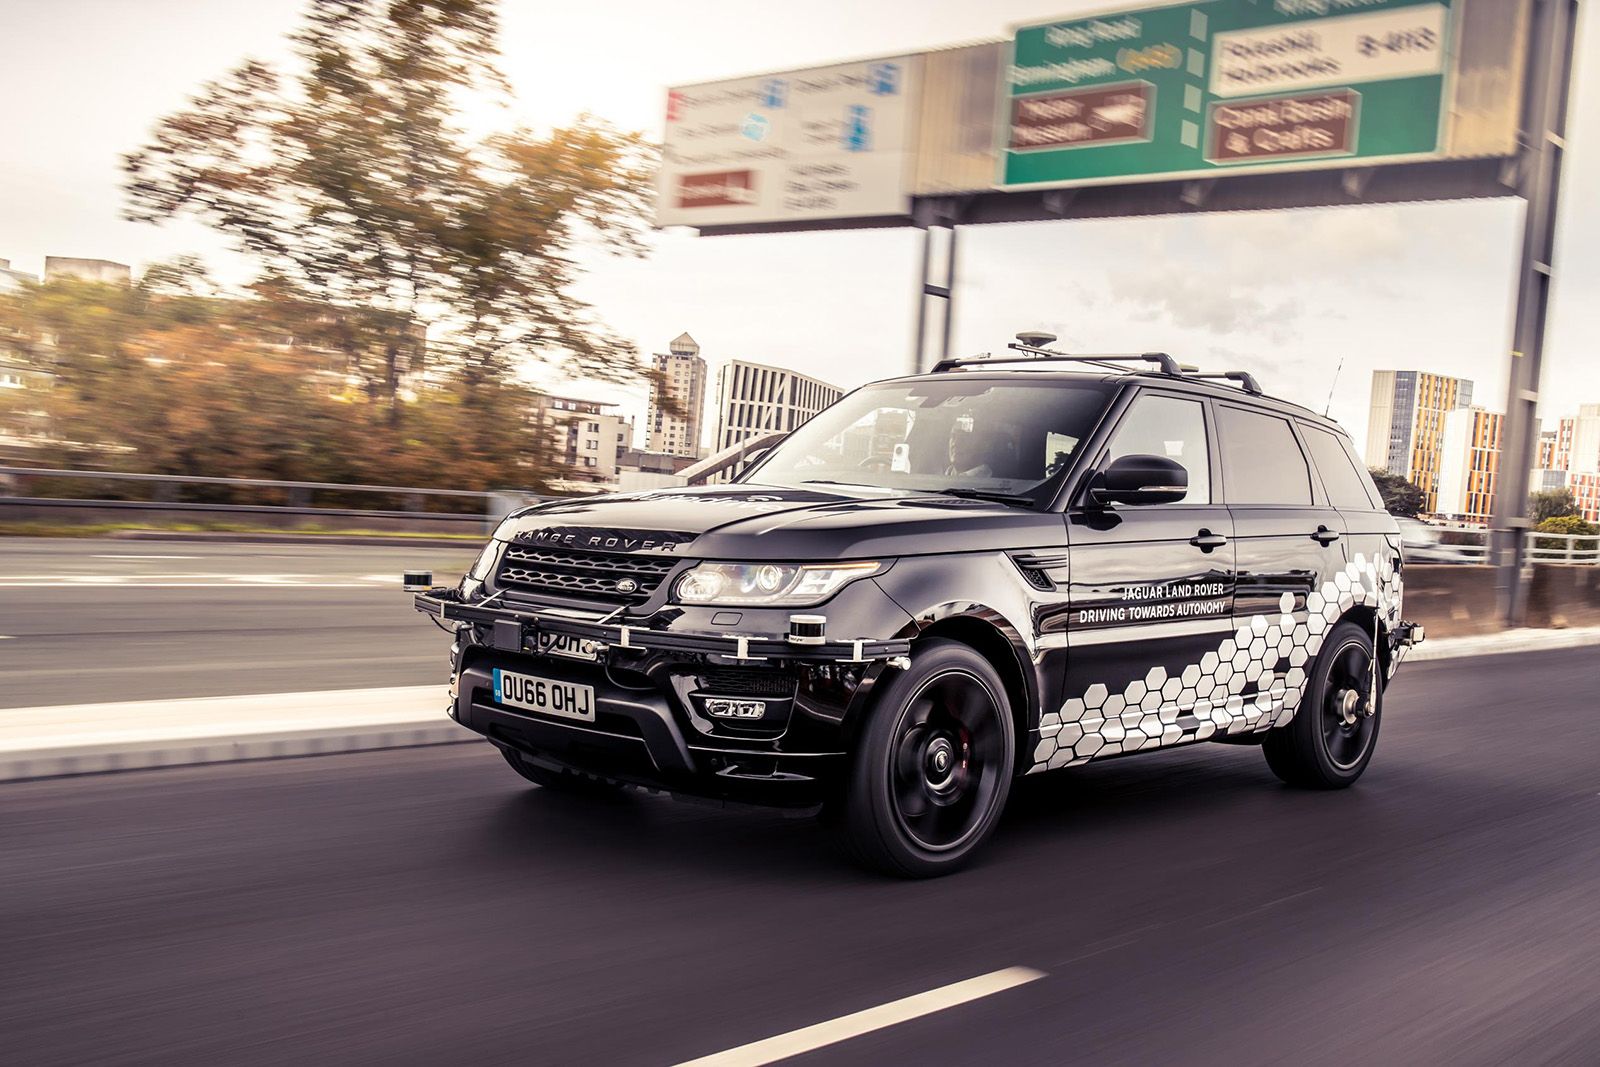 Self-driving Land Rover successfully travels around UK roads image 1